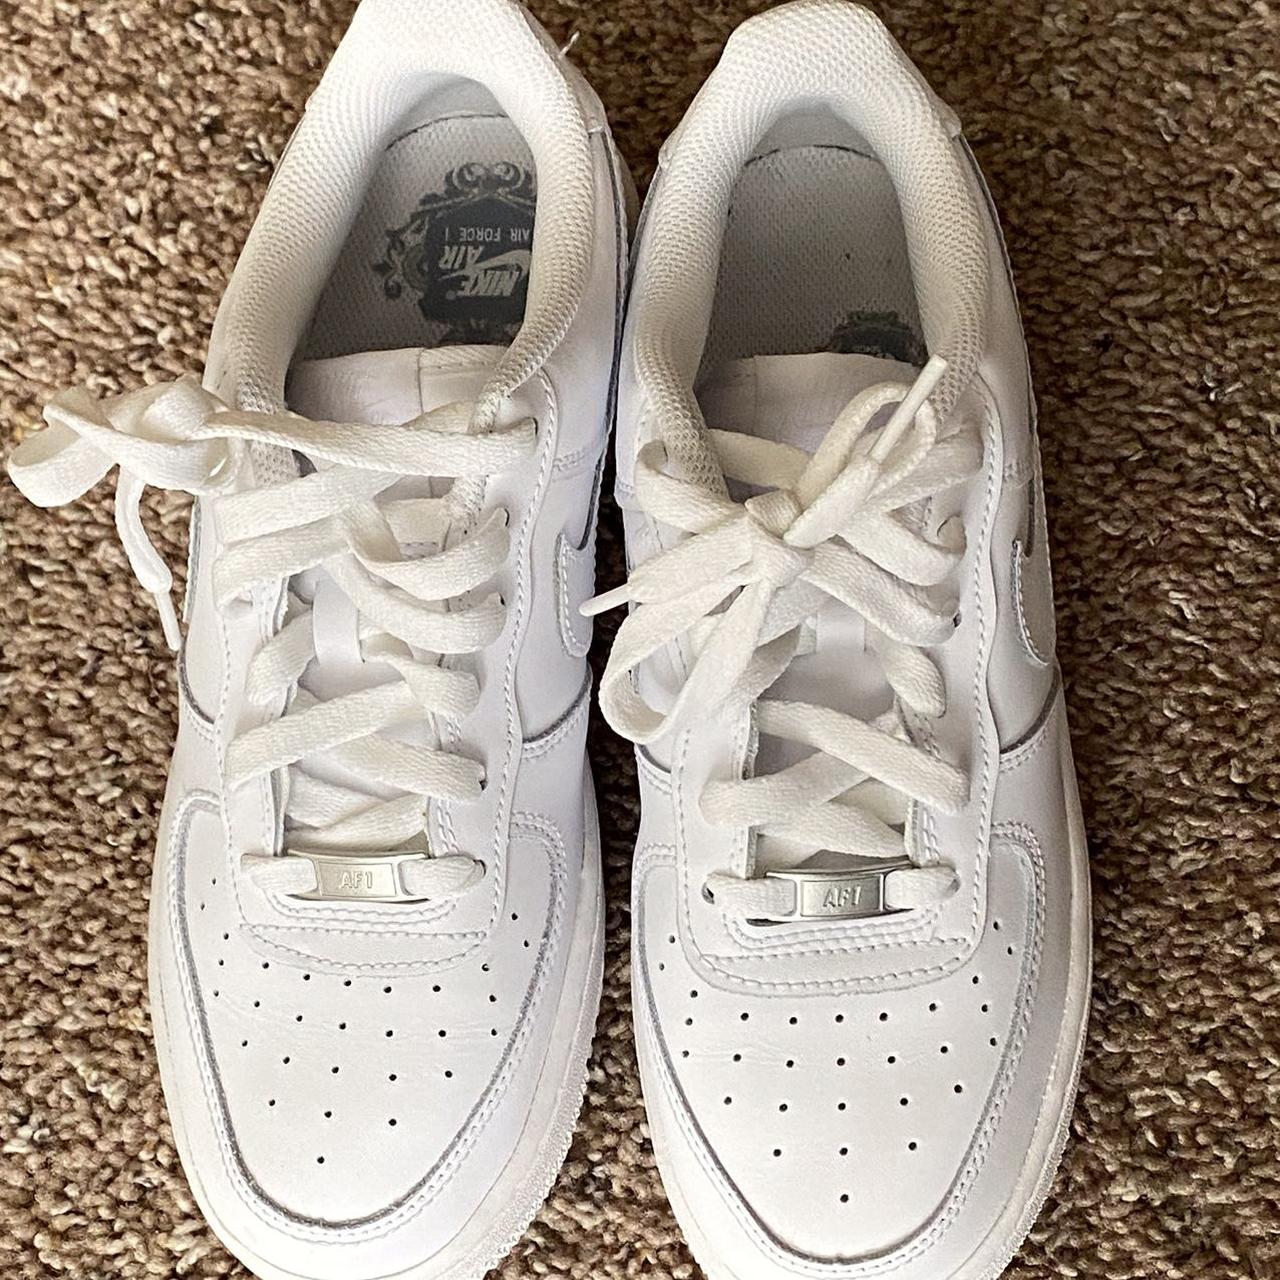 Classic White Nike Air Force 1 Sneakers Pair these... - Depop